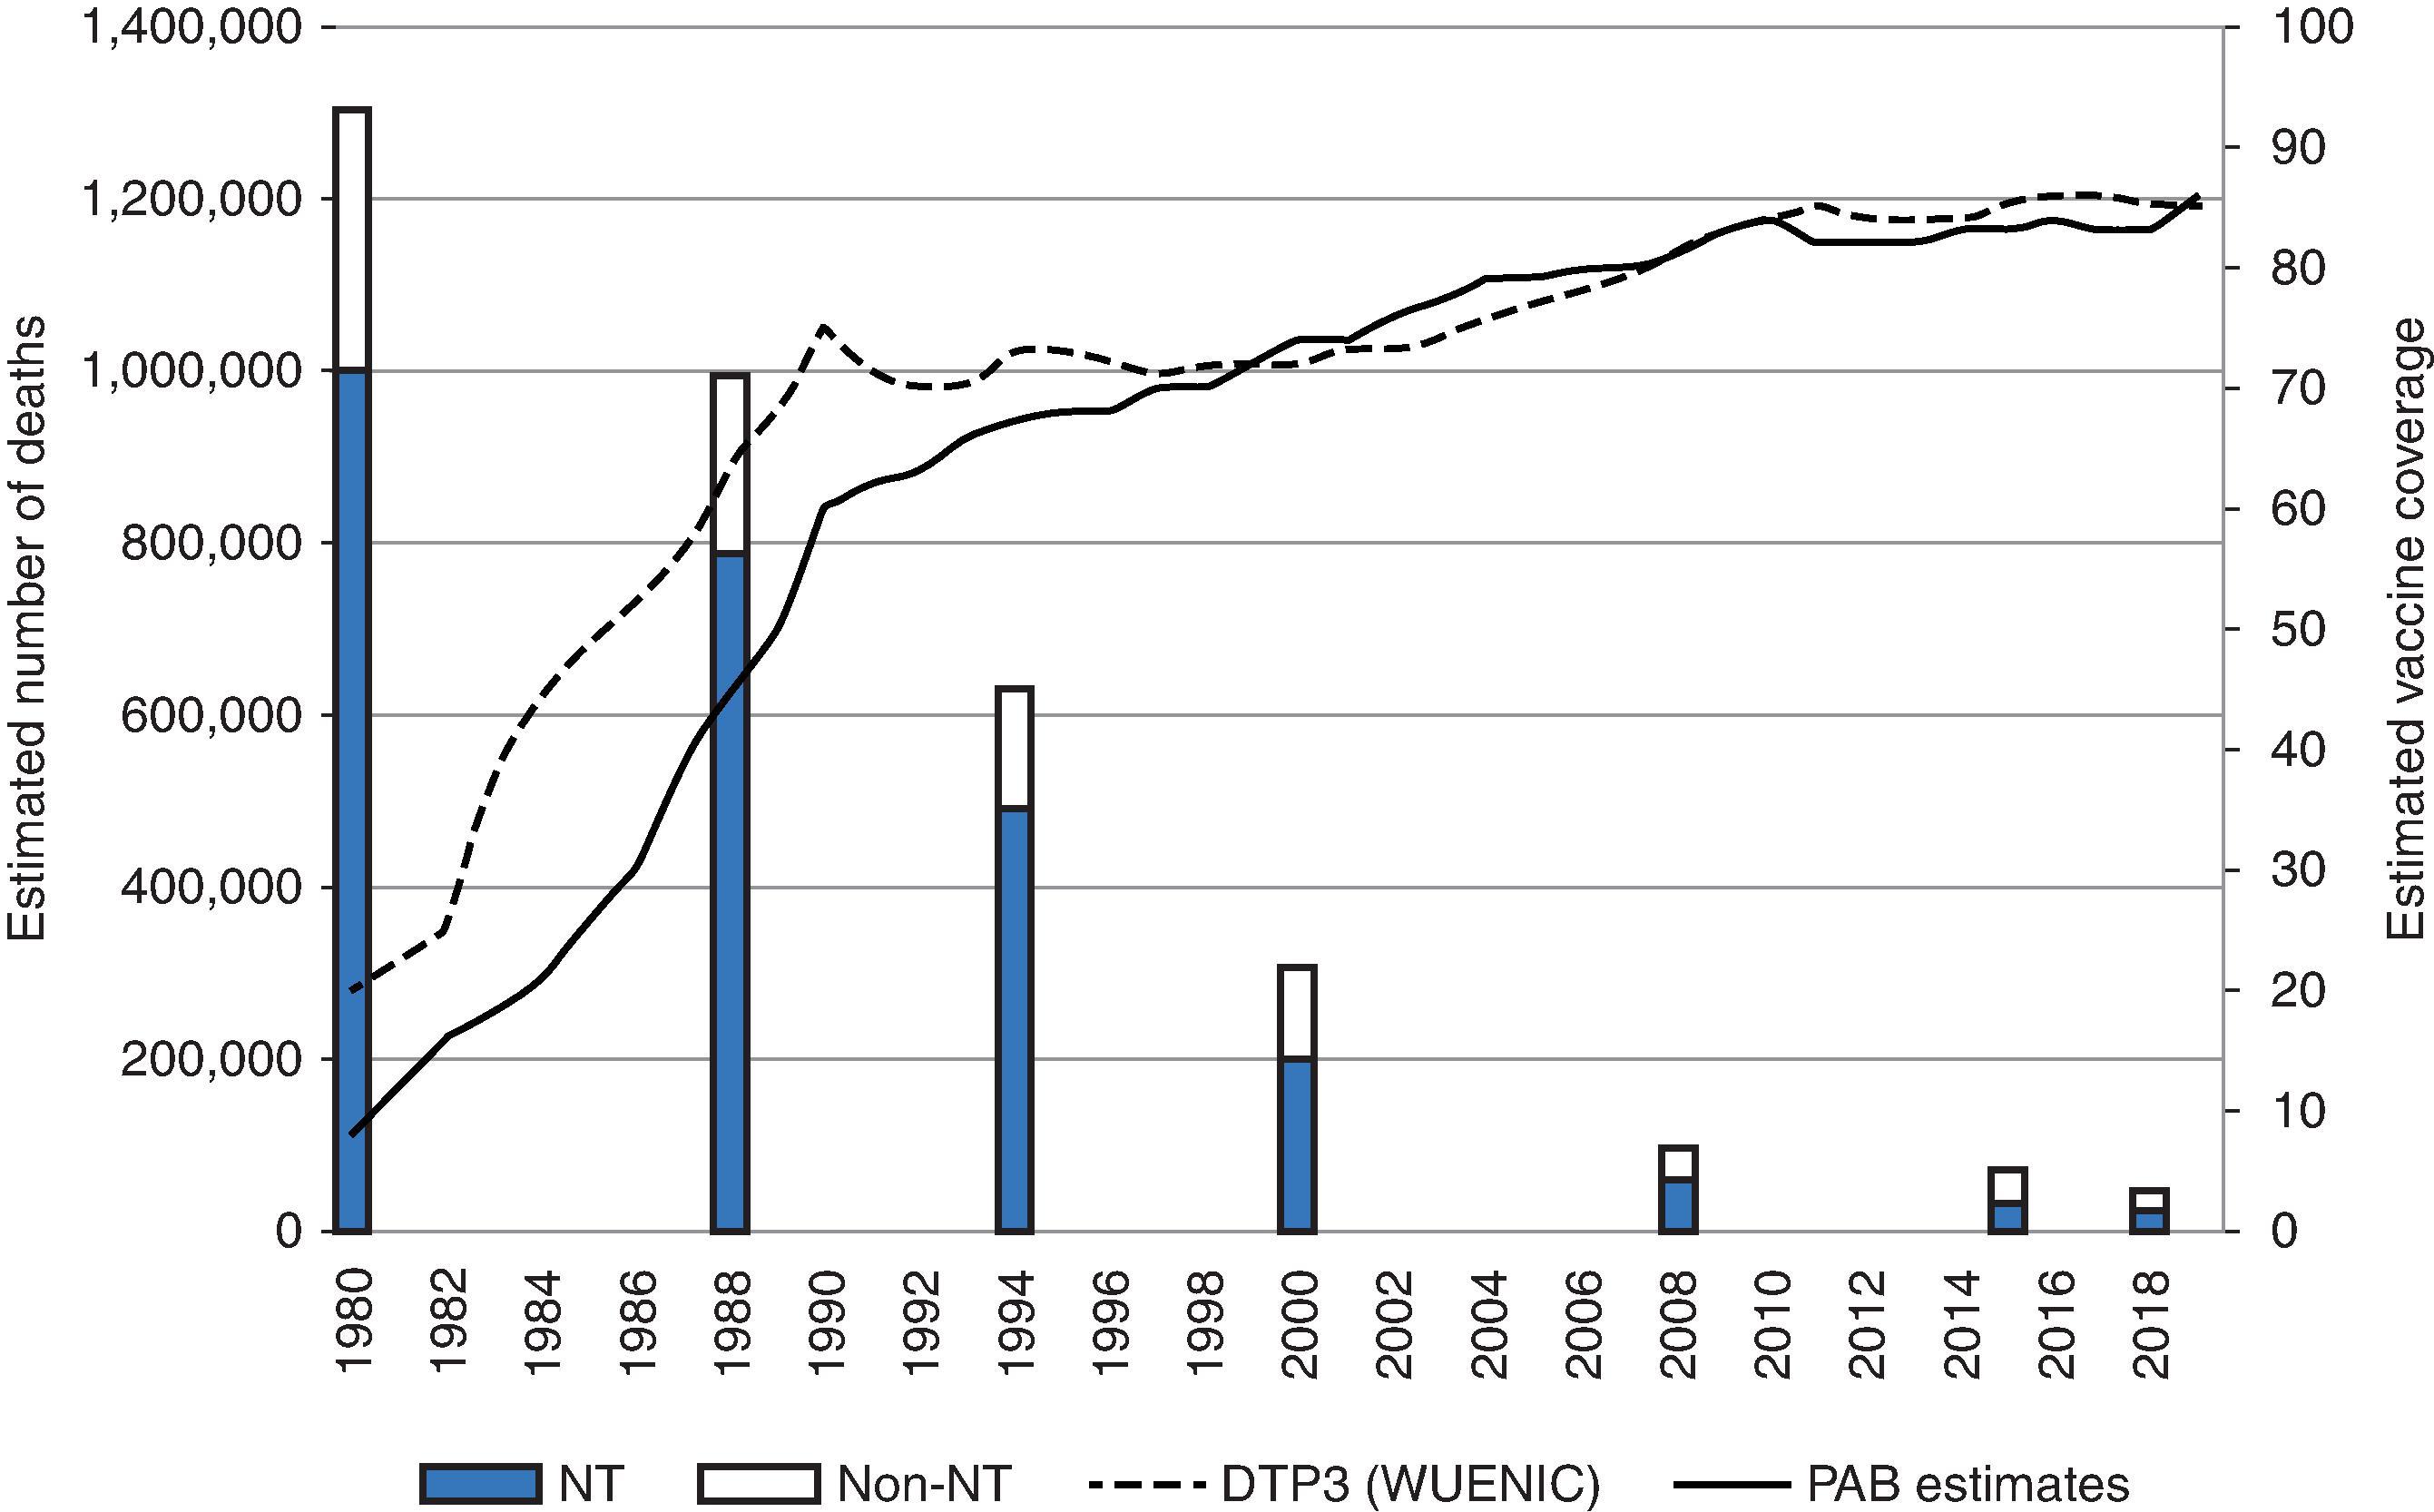 Fig. 59.5, Estimated deaths from neonatal tetanus (NT) and non-neonatal tetanus (Non-NT), and estimated coverage of DTPCV3 (3 rd dose of diphtheria-tetanus-pertussis containing vaccine in infants) and Protected at Birth (PAB) coverage, 1980–2019 . The estimates of tetanus deaths were derived from different sources (see below).